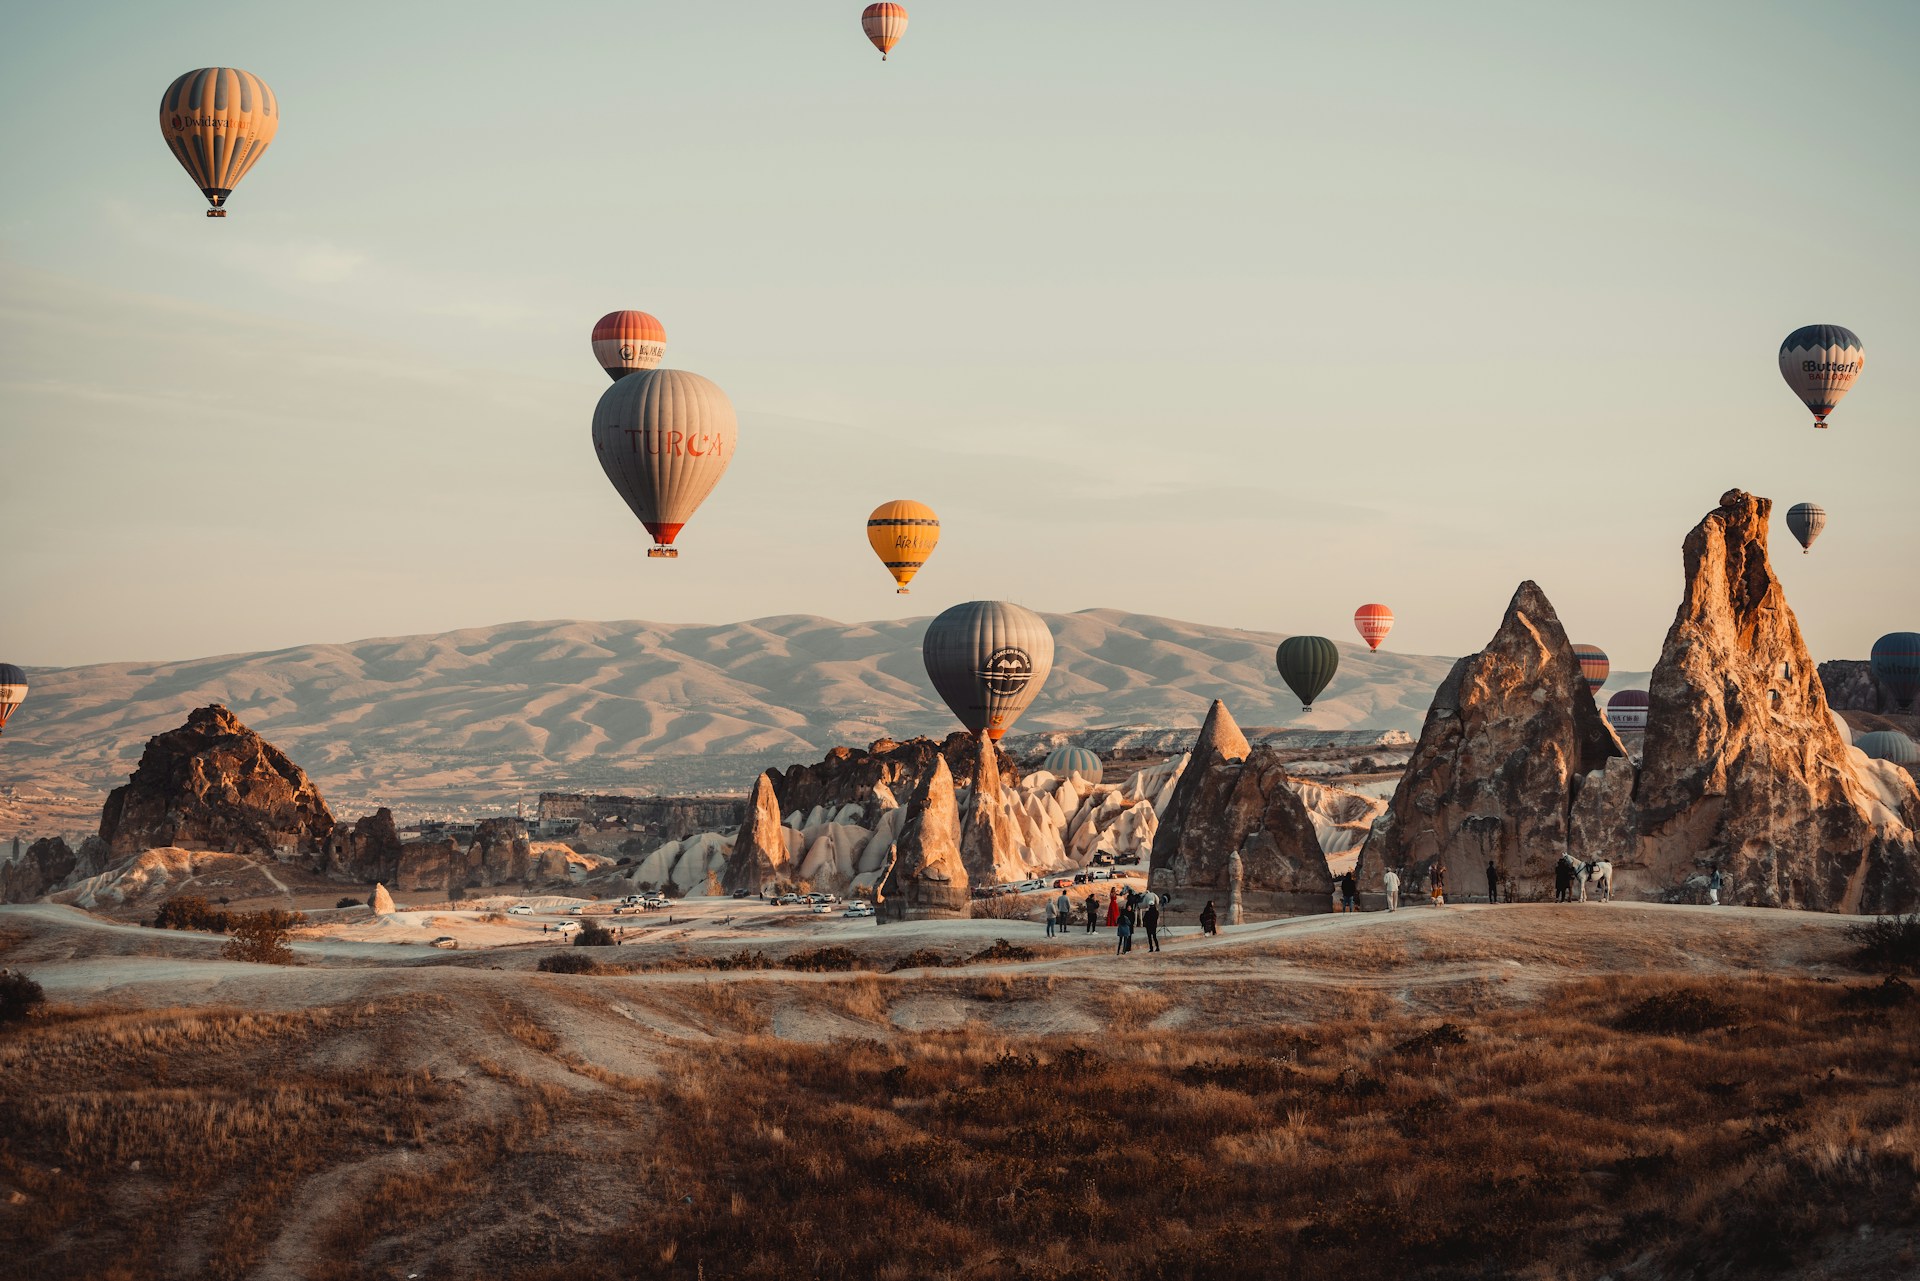 <p>The region of Cappadocia is famous for its rock formations, chimneys, and sunrise balloon rides. Travelers have described it as a fantasy world on Earth.</p> <p>Picture: Timur Garifov / Unsplash</p>